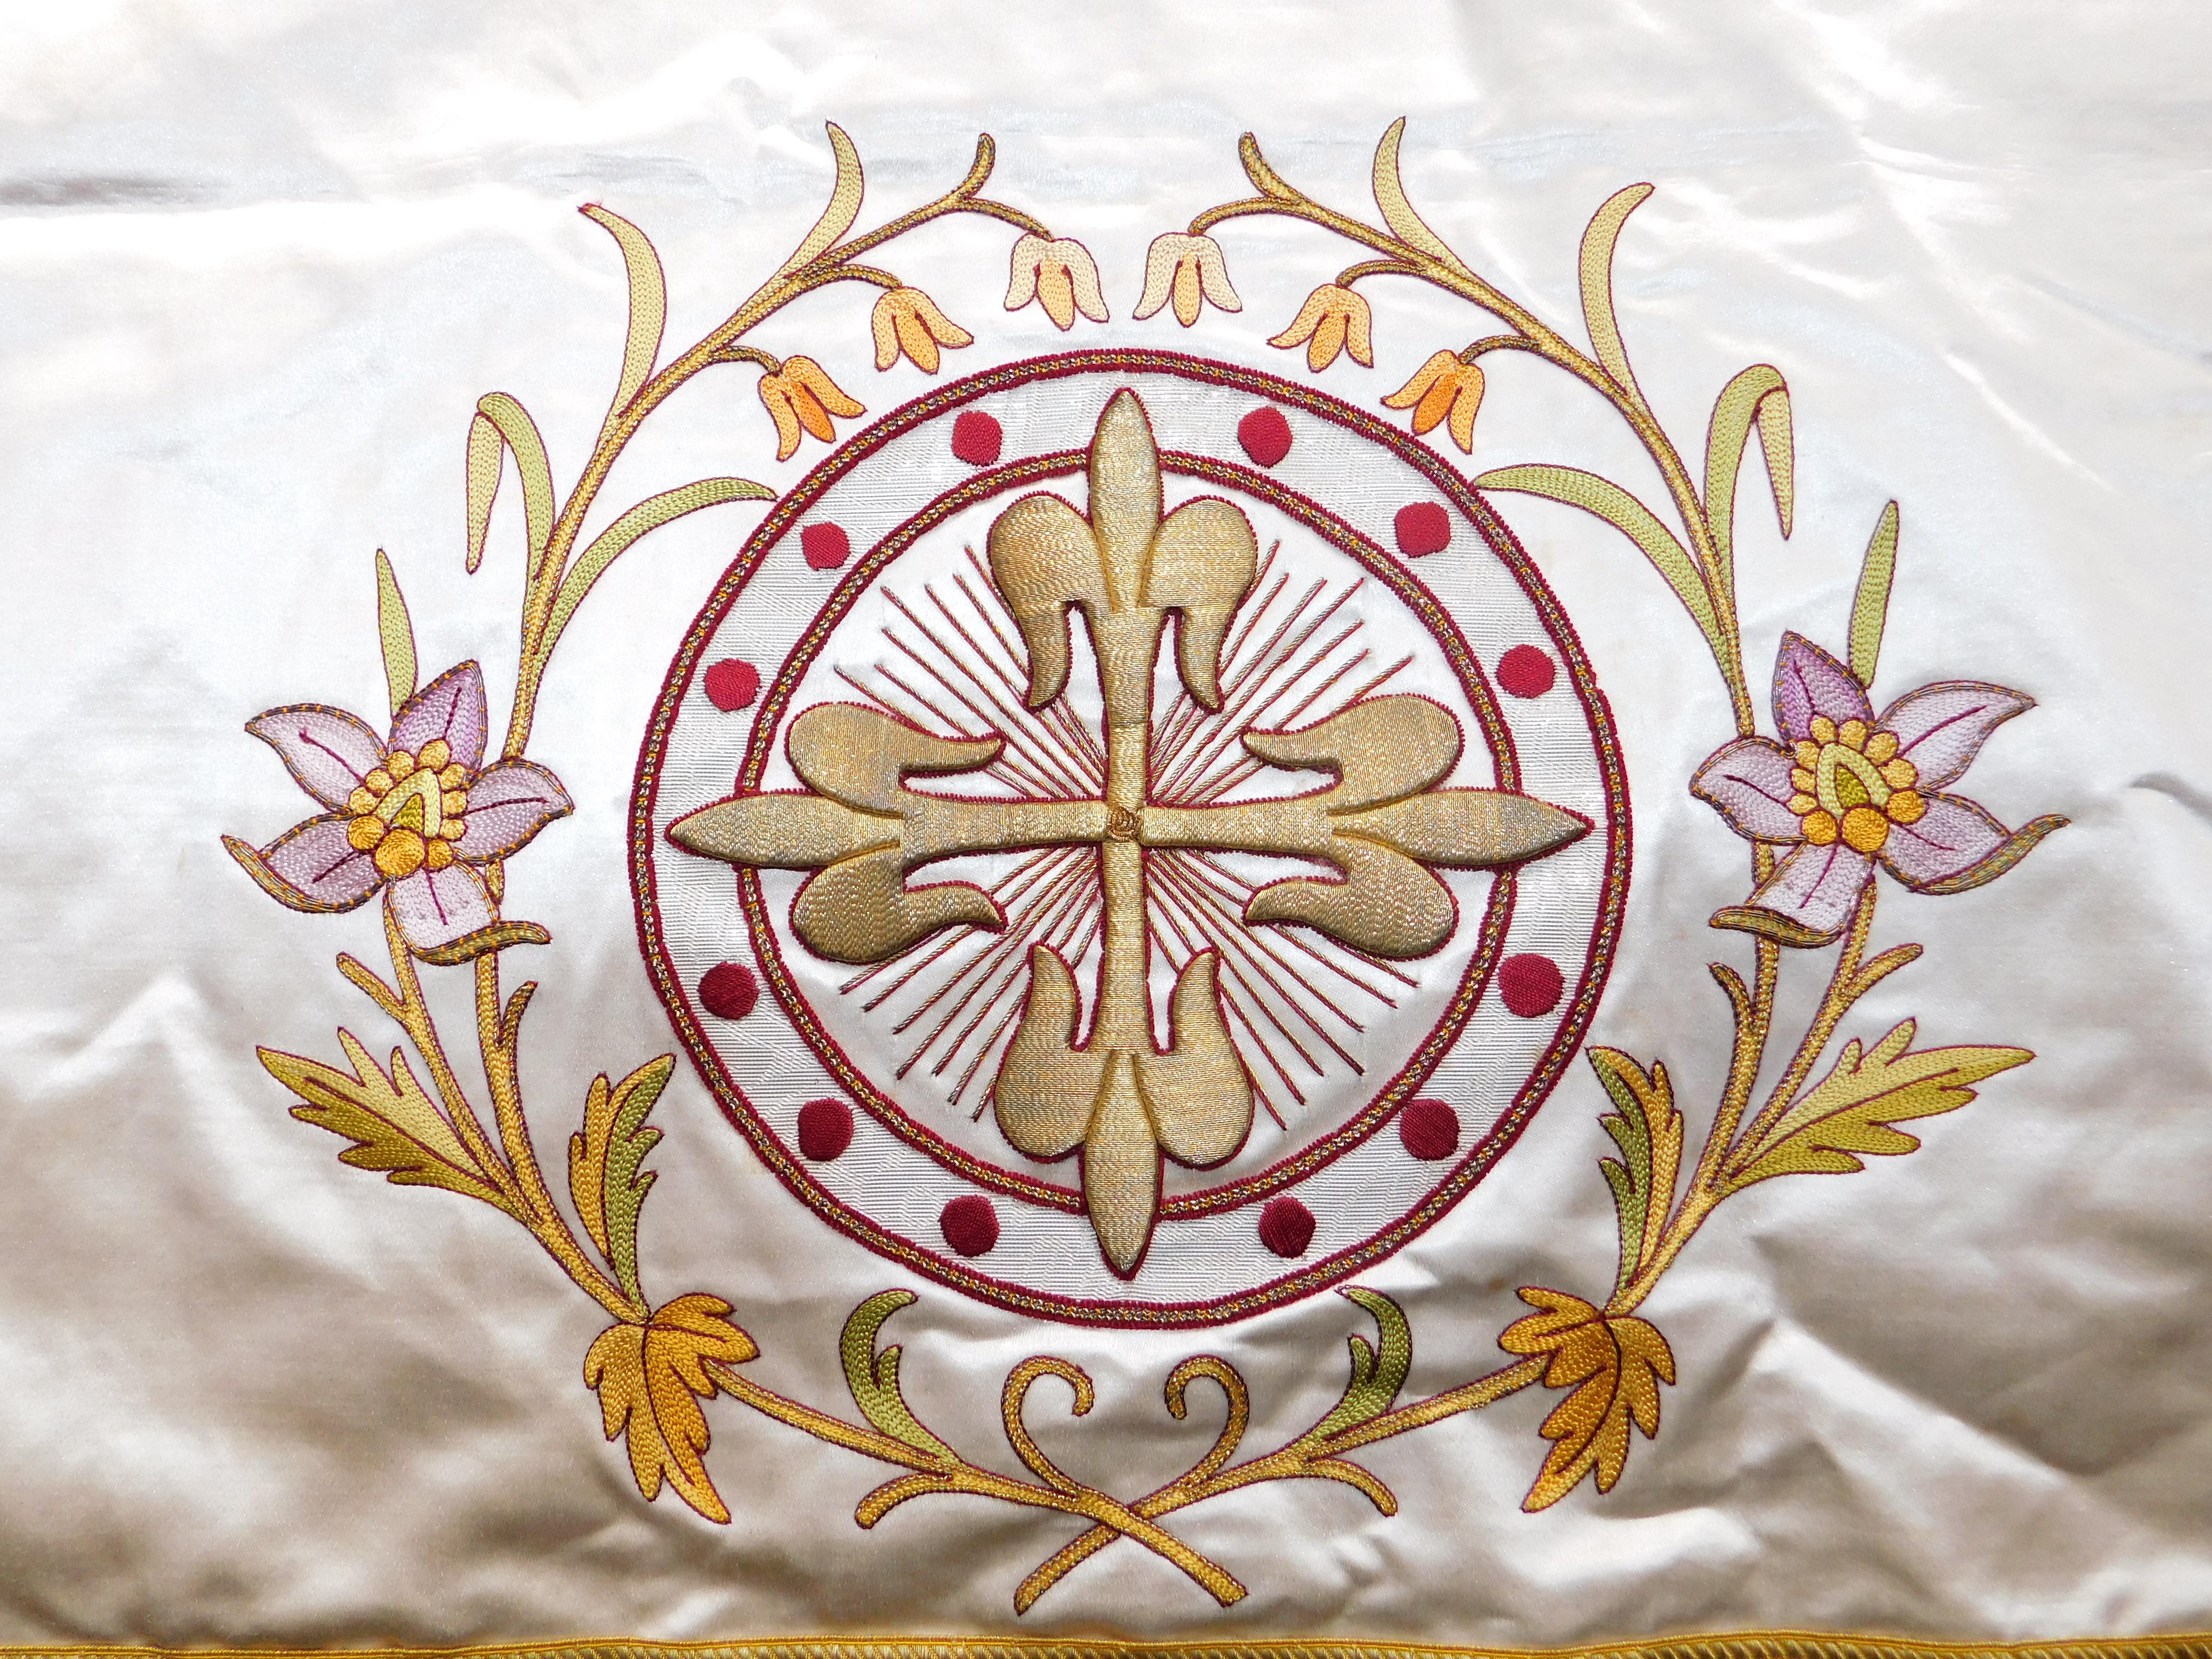 A group of five ecclesiastical textiles, circa 1940. In good condition and easily made into a pillows. One is velvet with gilt edging, One is silk satin with heavily embroidered design in gold bullion and silk chain stitch embroidery, Three are silk